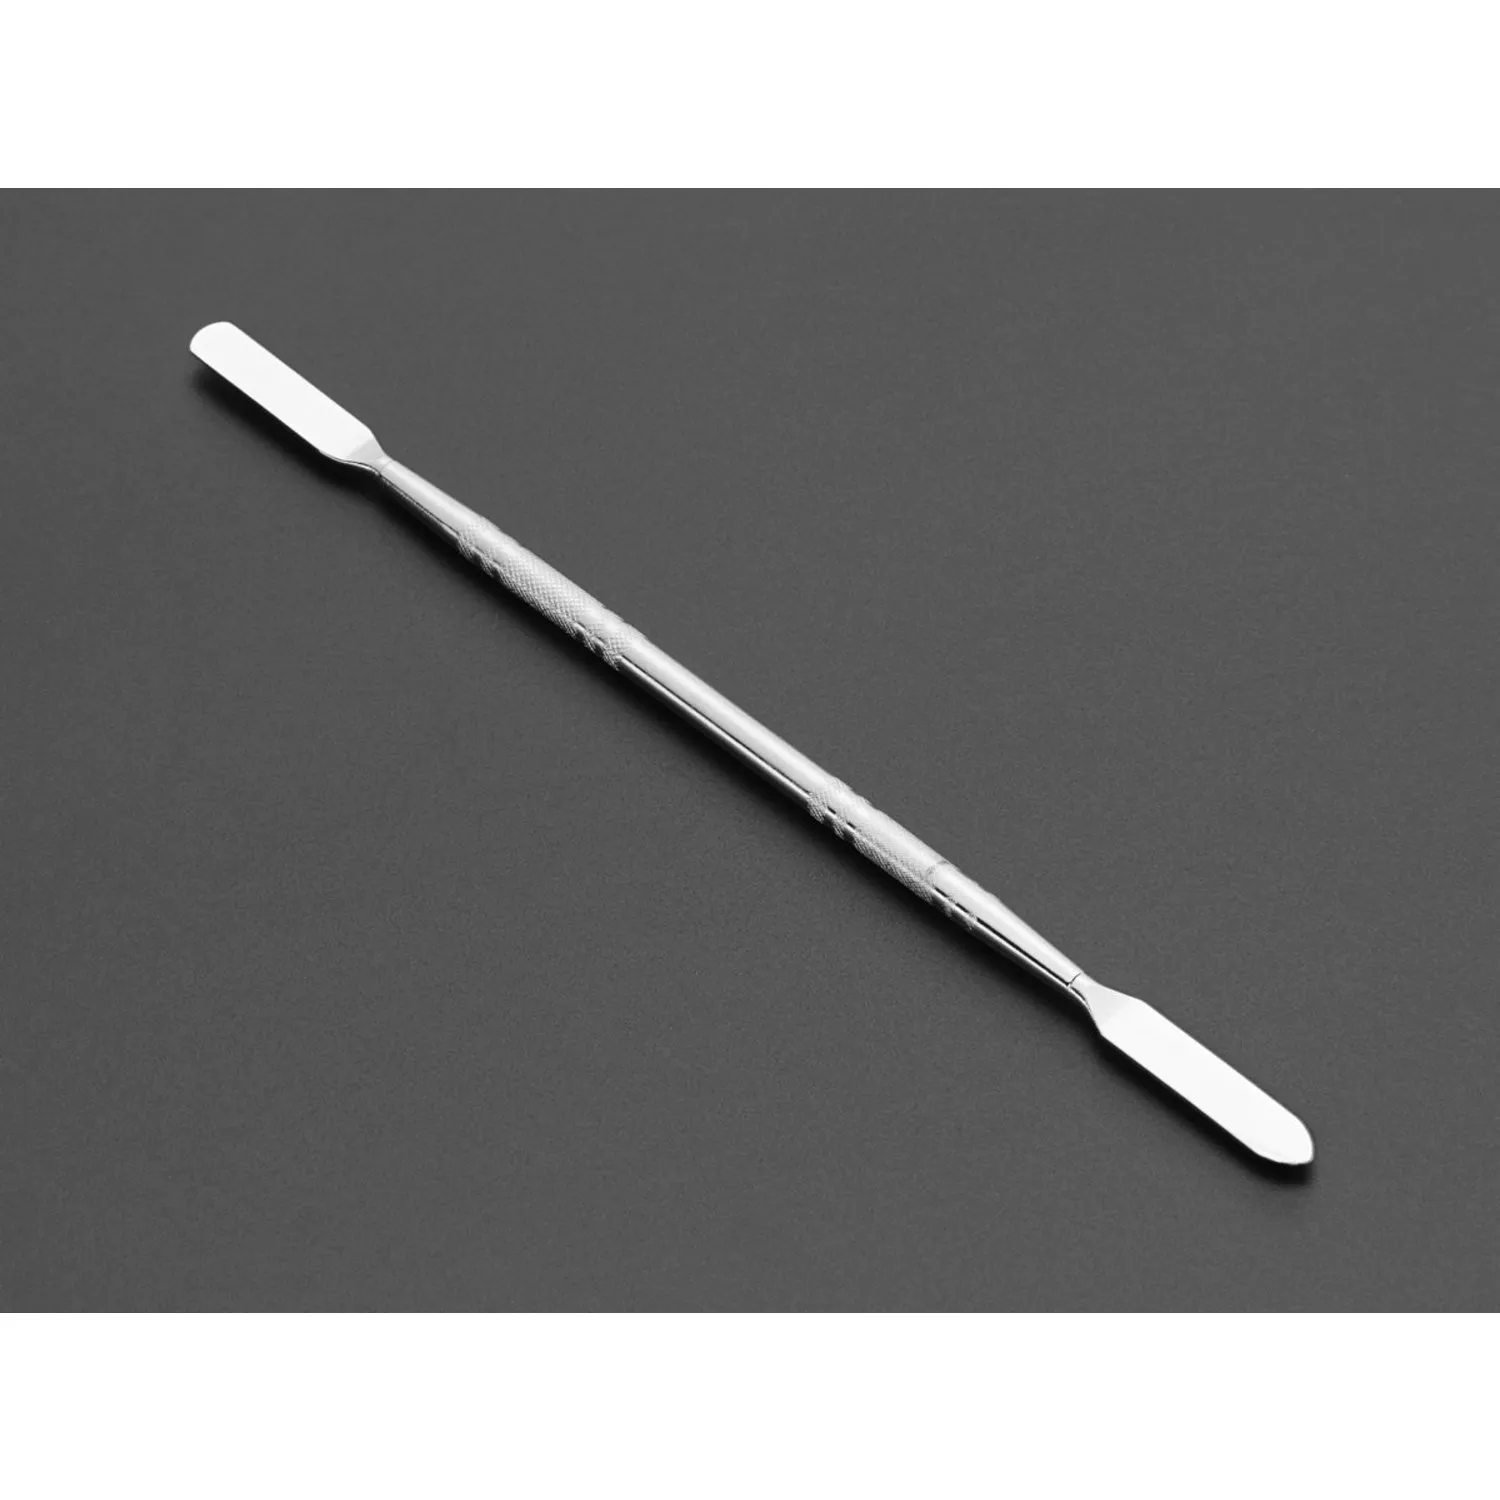 Photo of Spudger - Double Sided Prying Tool